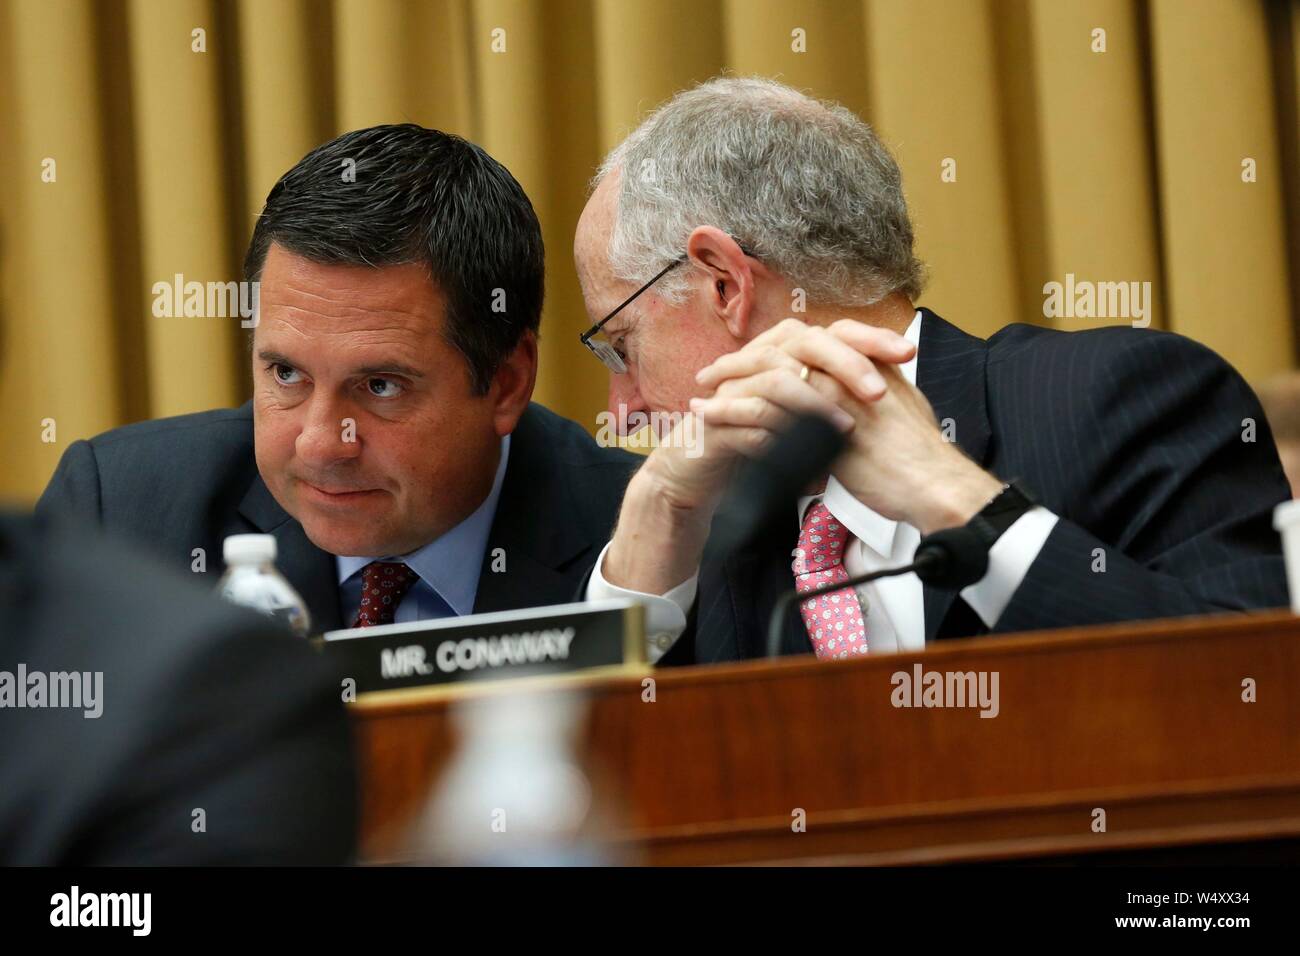 United States Representative Devin Nunes (Republican of California), ranking member, left, and US Representative Michael Conaway (Republican of Texas), right, converse during the questioning of former Trump-Russia special counsel Robert Mueller as he gives testimony before the United States House Permanent Select Committee on Intelligence on the results of his investigation on Capitol Hill in Washington, DC on Wednesday, July 24, 2019.Credit: Stefani Reynolds/CNP (RESTRICTION: NO New York or New Jersey Newspapers or newspapers within a 75 mile radius of New York City) | usage worldwide Stock Photo